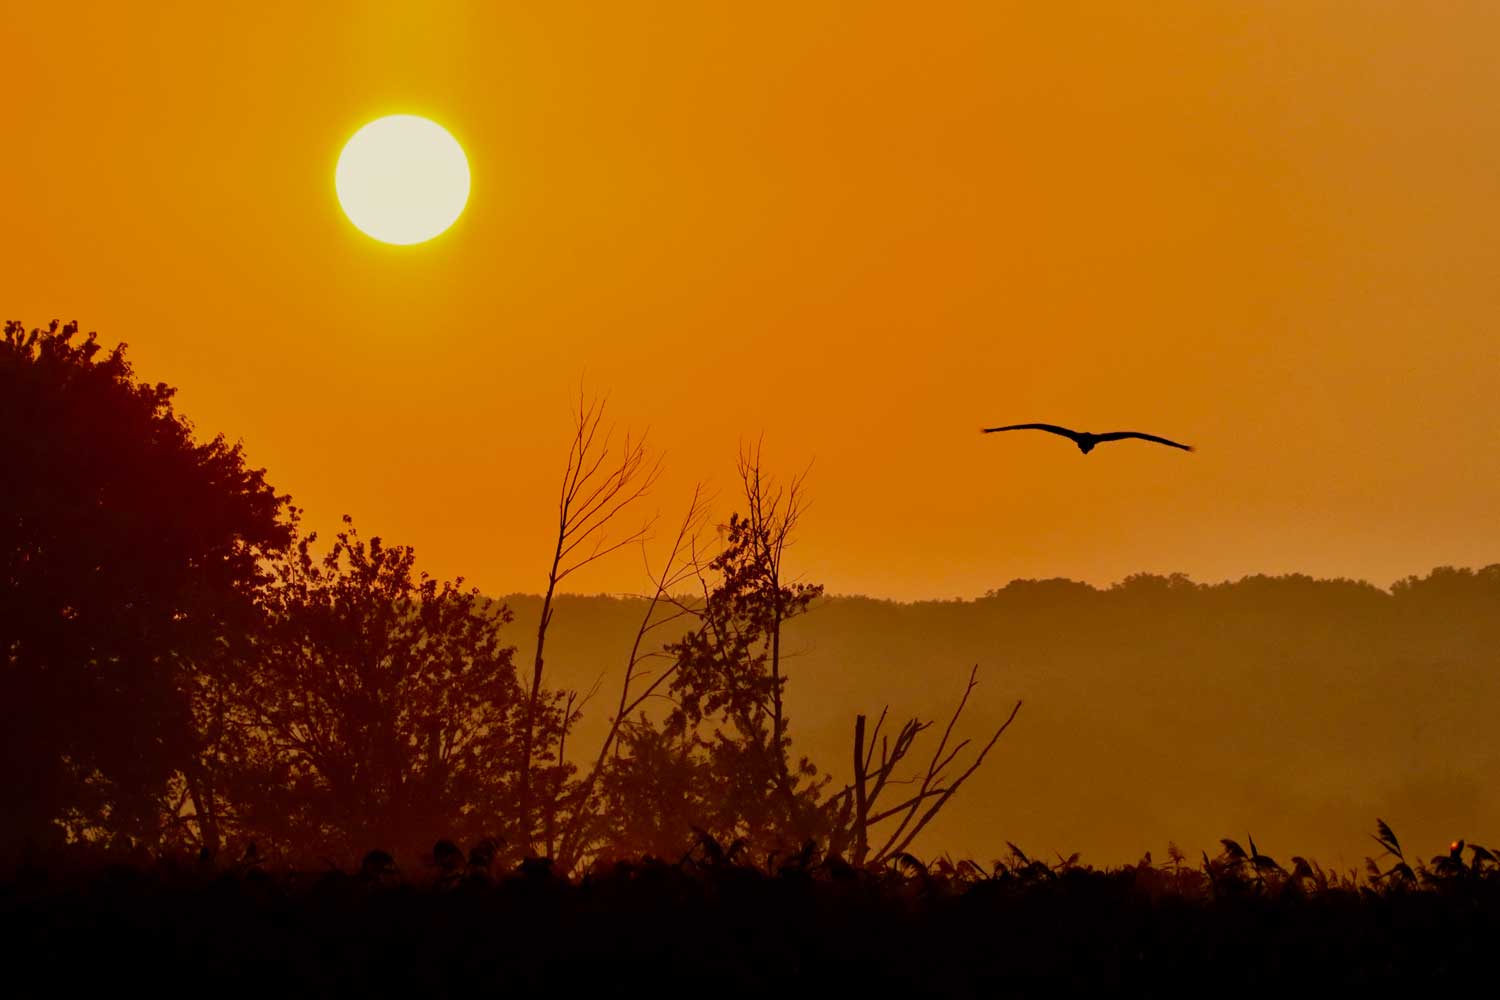 An orange, hazy sky as the sun sets with a bird flying through the air and trees in the background.